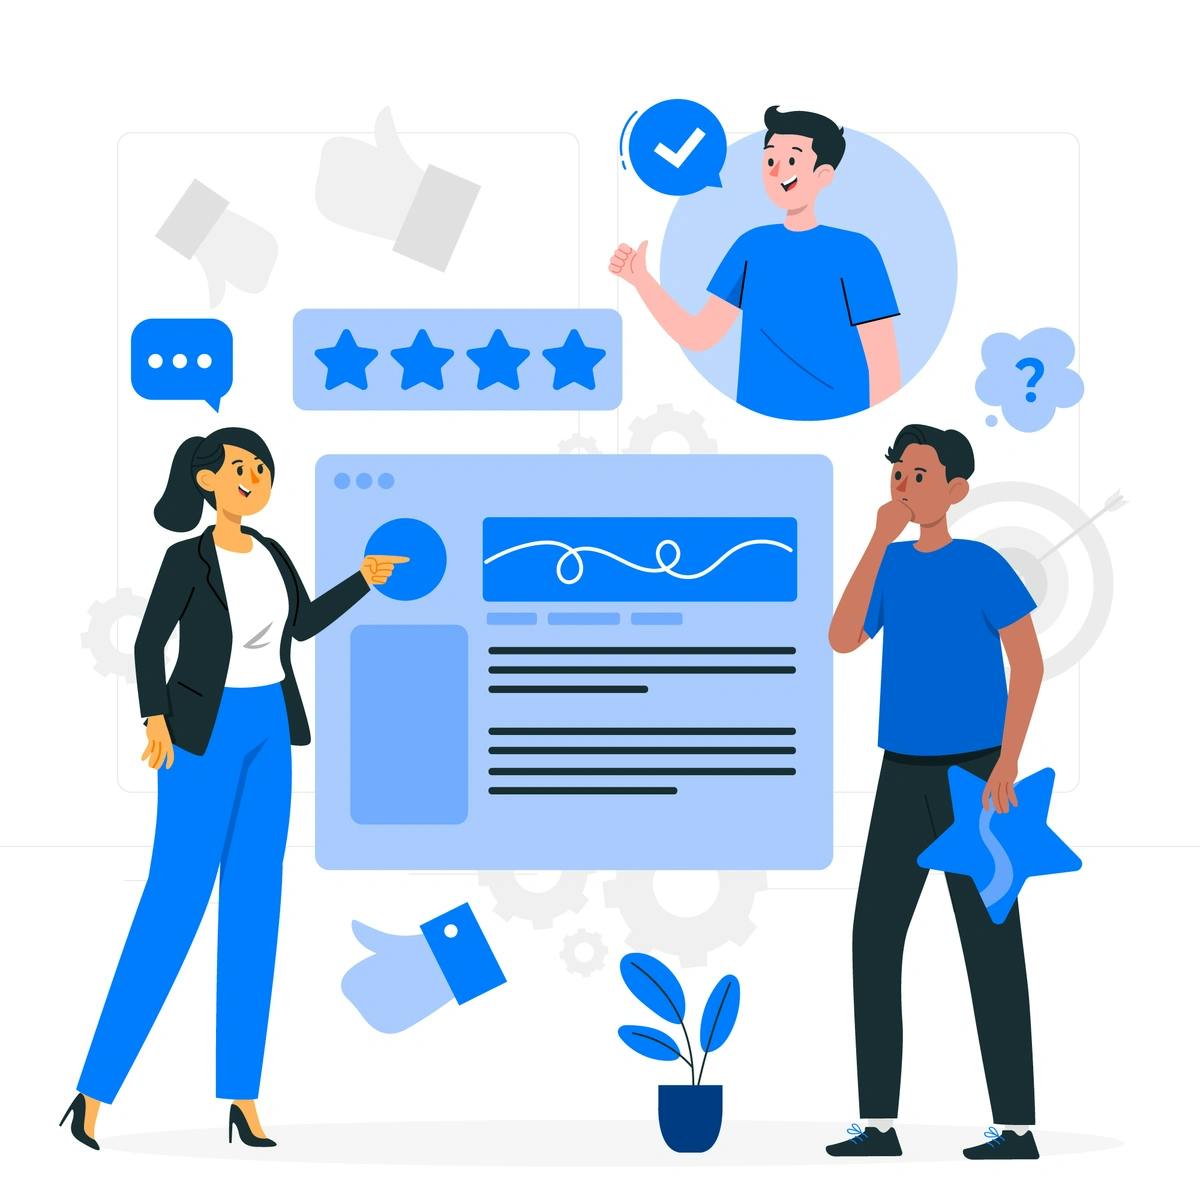 A colorful illustration depicting a woman and two men with various social media and customer feedback icons floating around them, such as likes, comments, a verified checkmark, and star ratings. The woman is presenting, one man is giving a thumbs up,